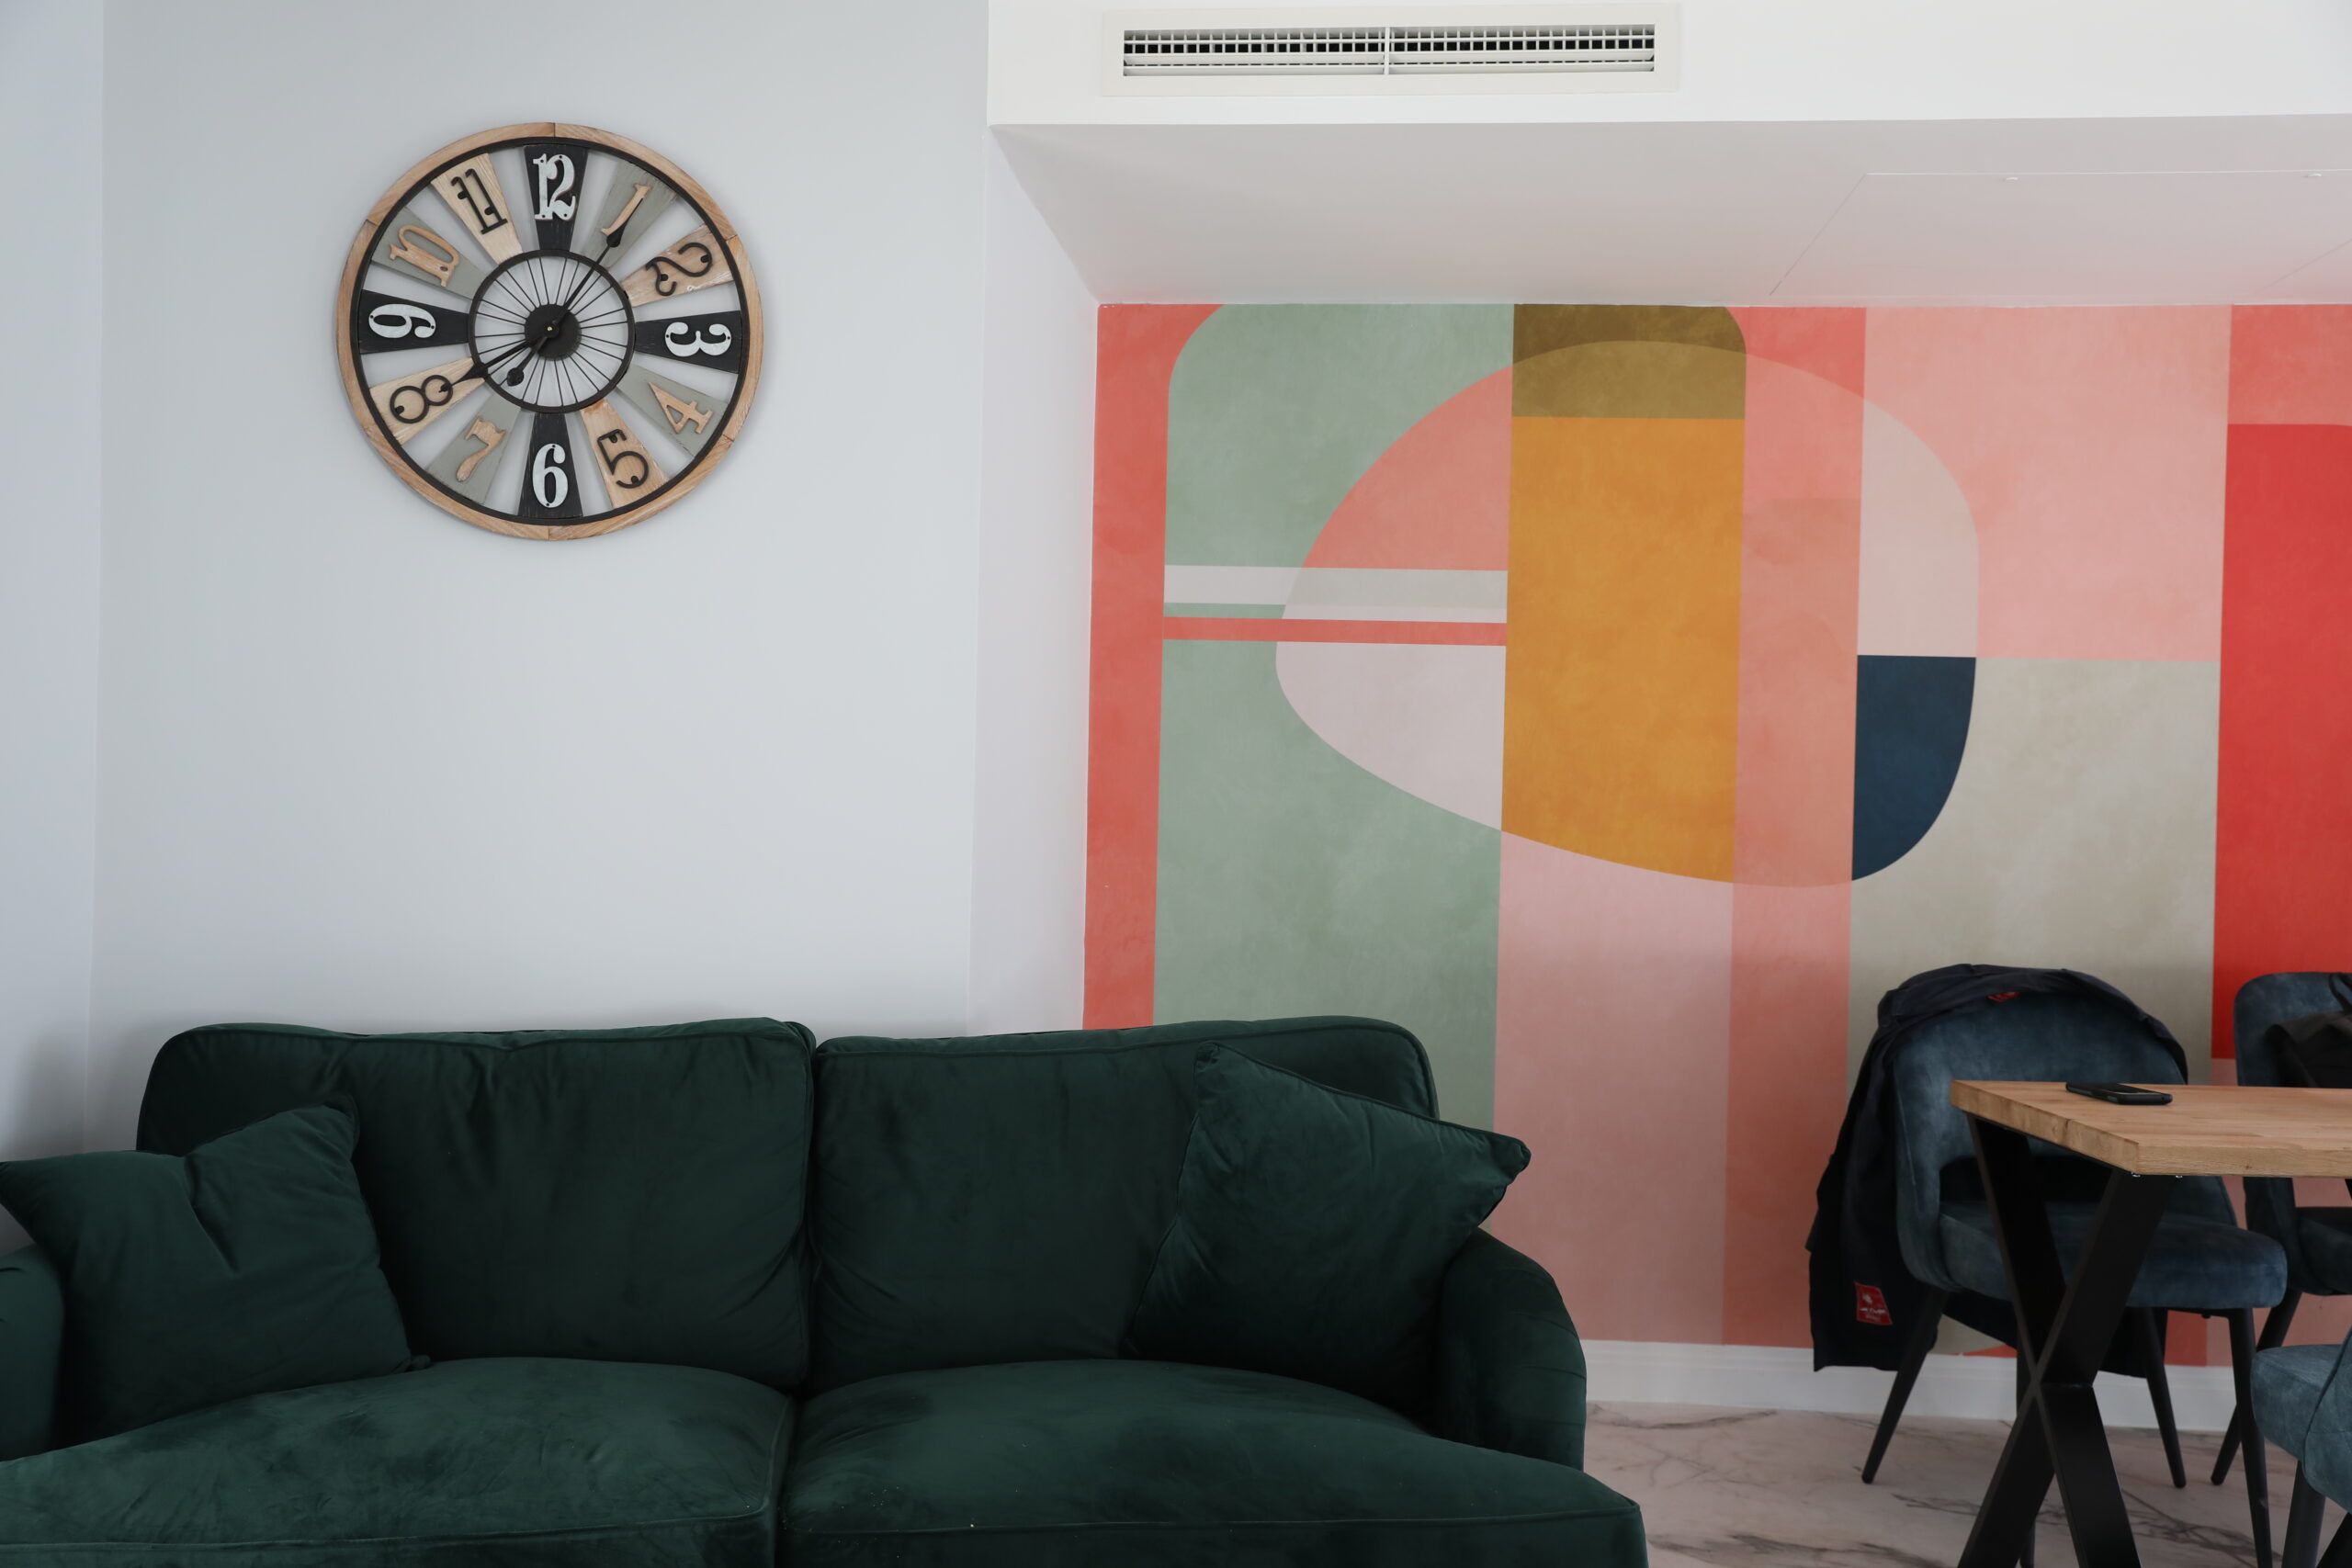 Relaxed vibes. Simple artwork next to a dark green couch with a clock on the wall. 